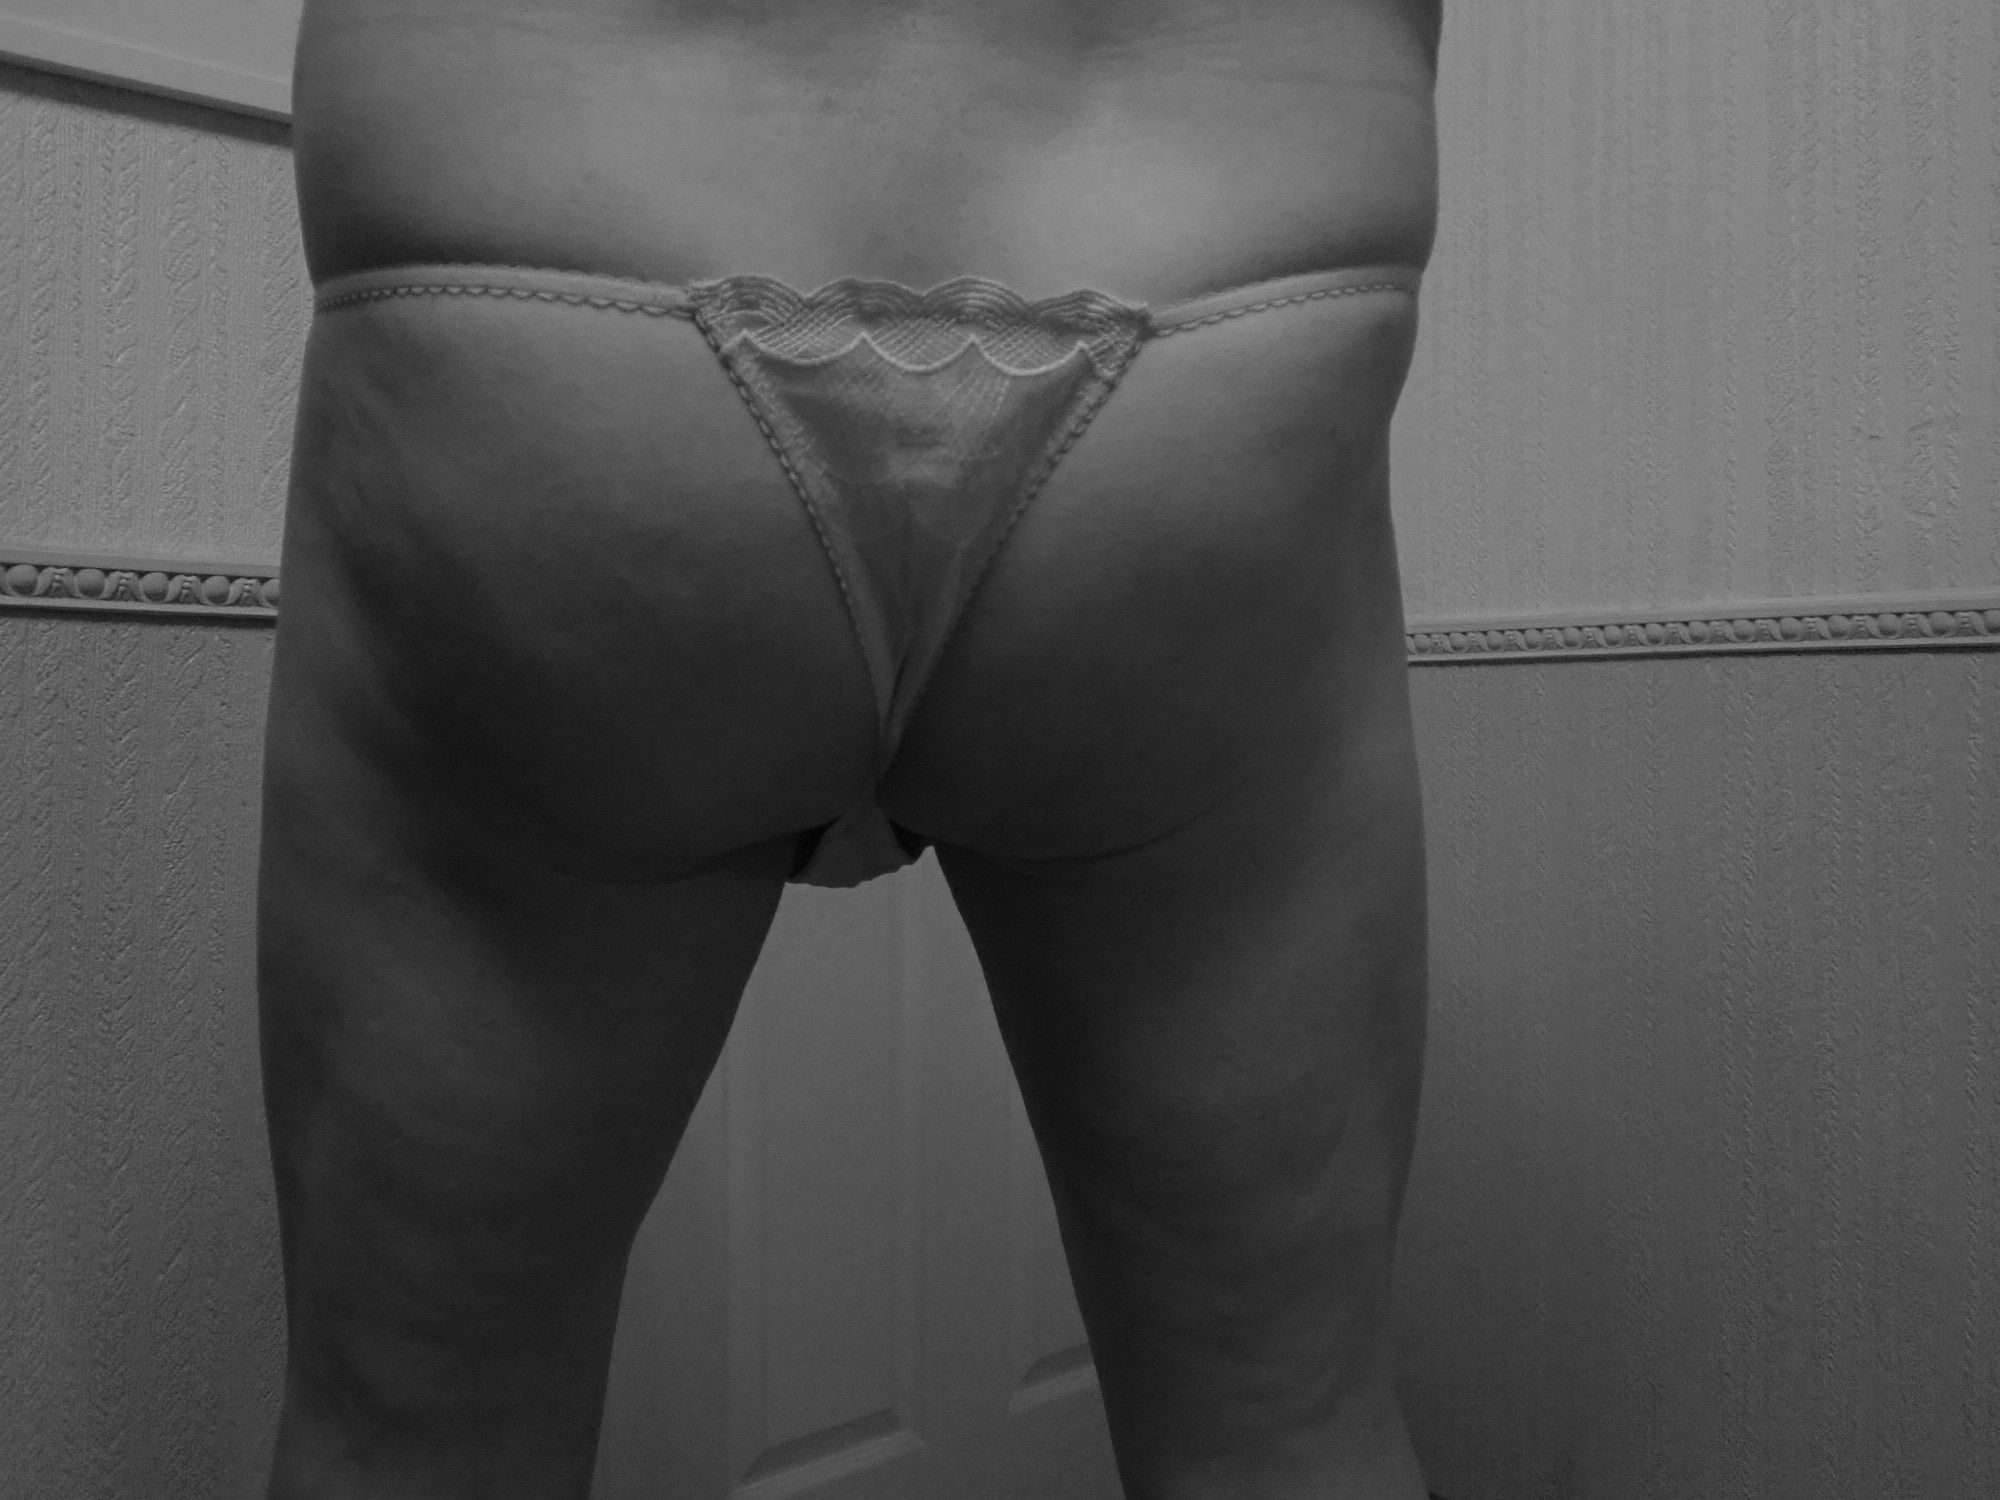 in my new thong